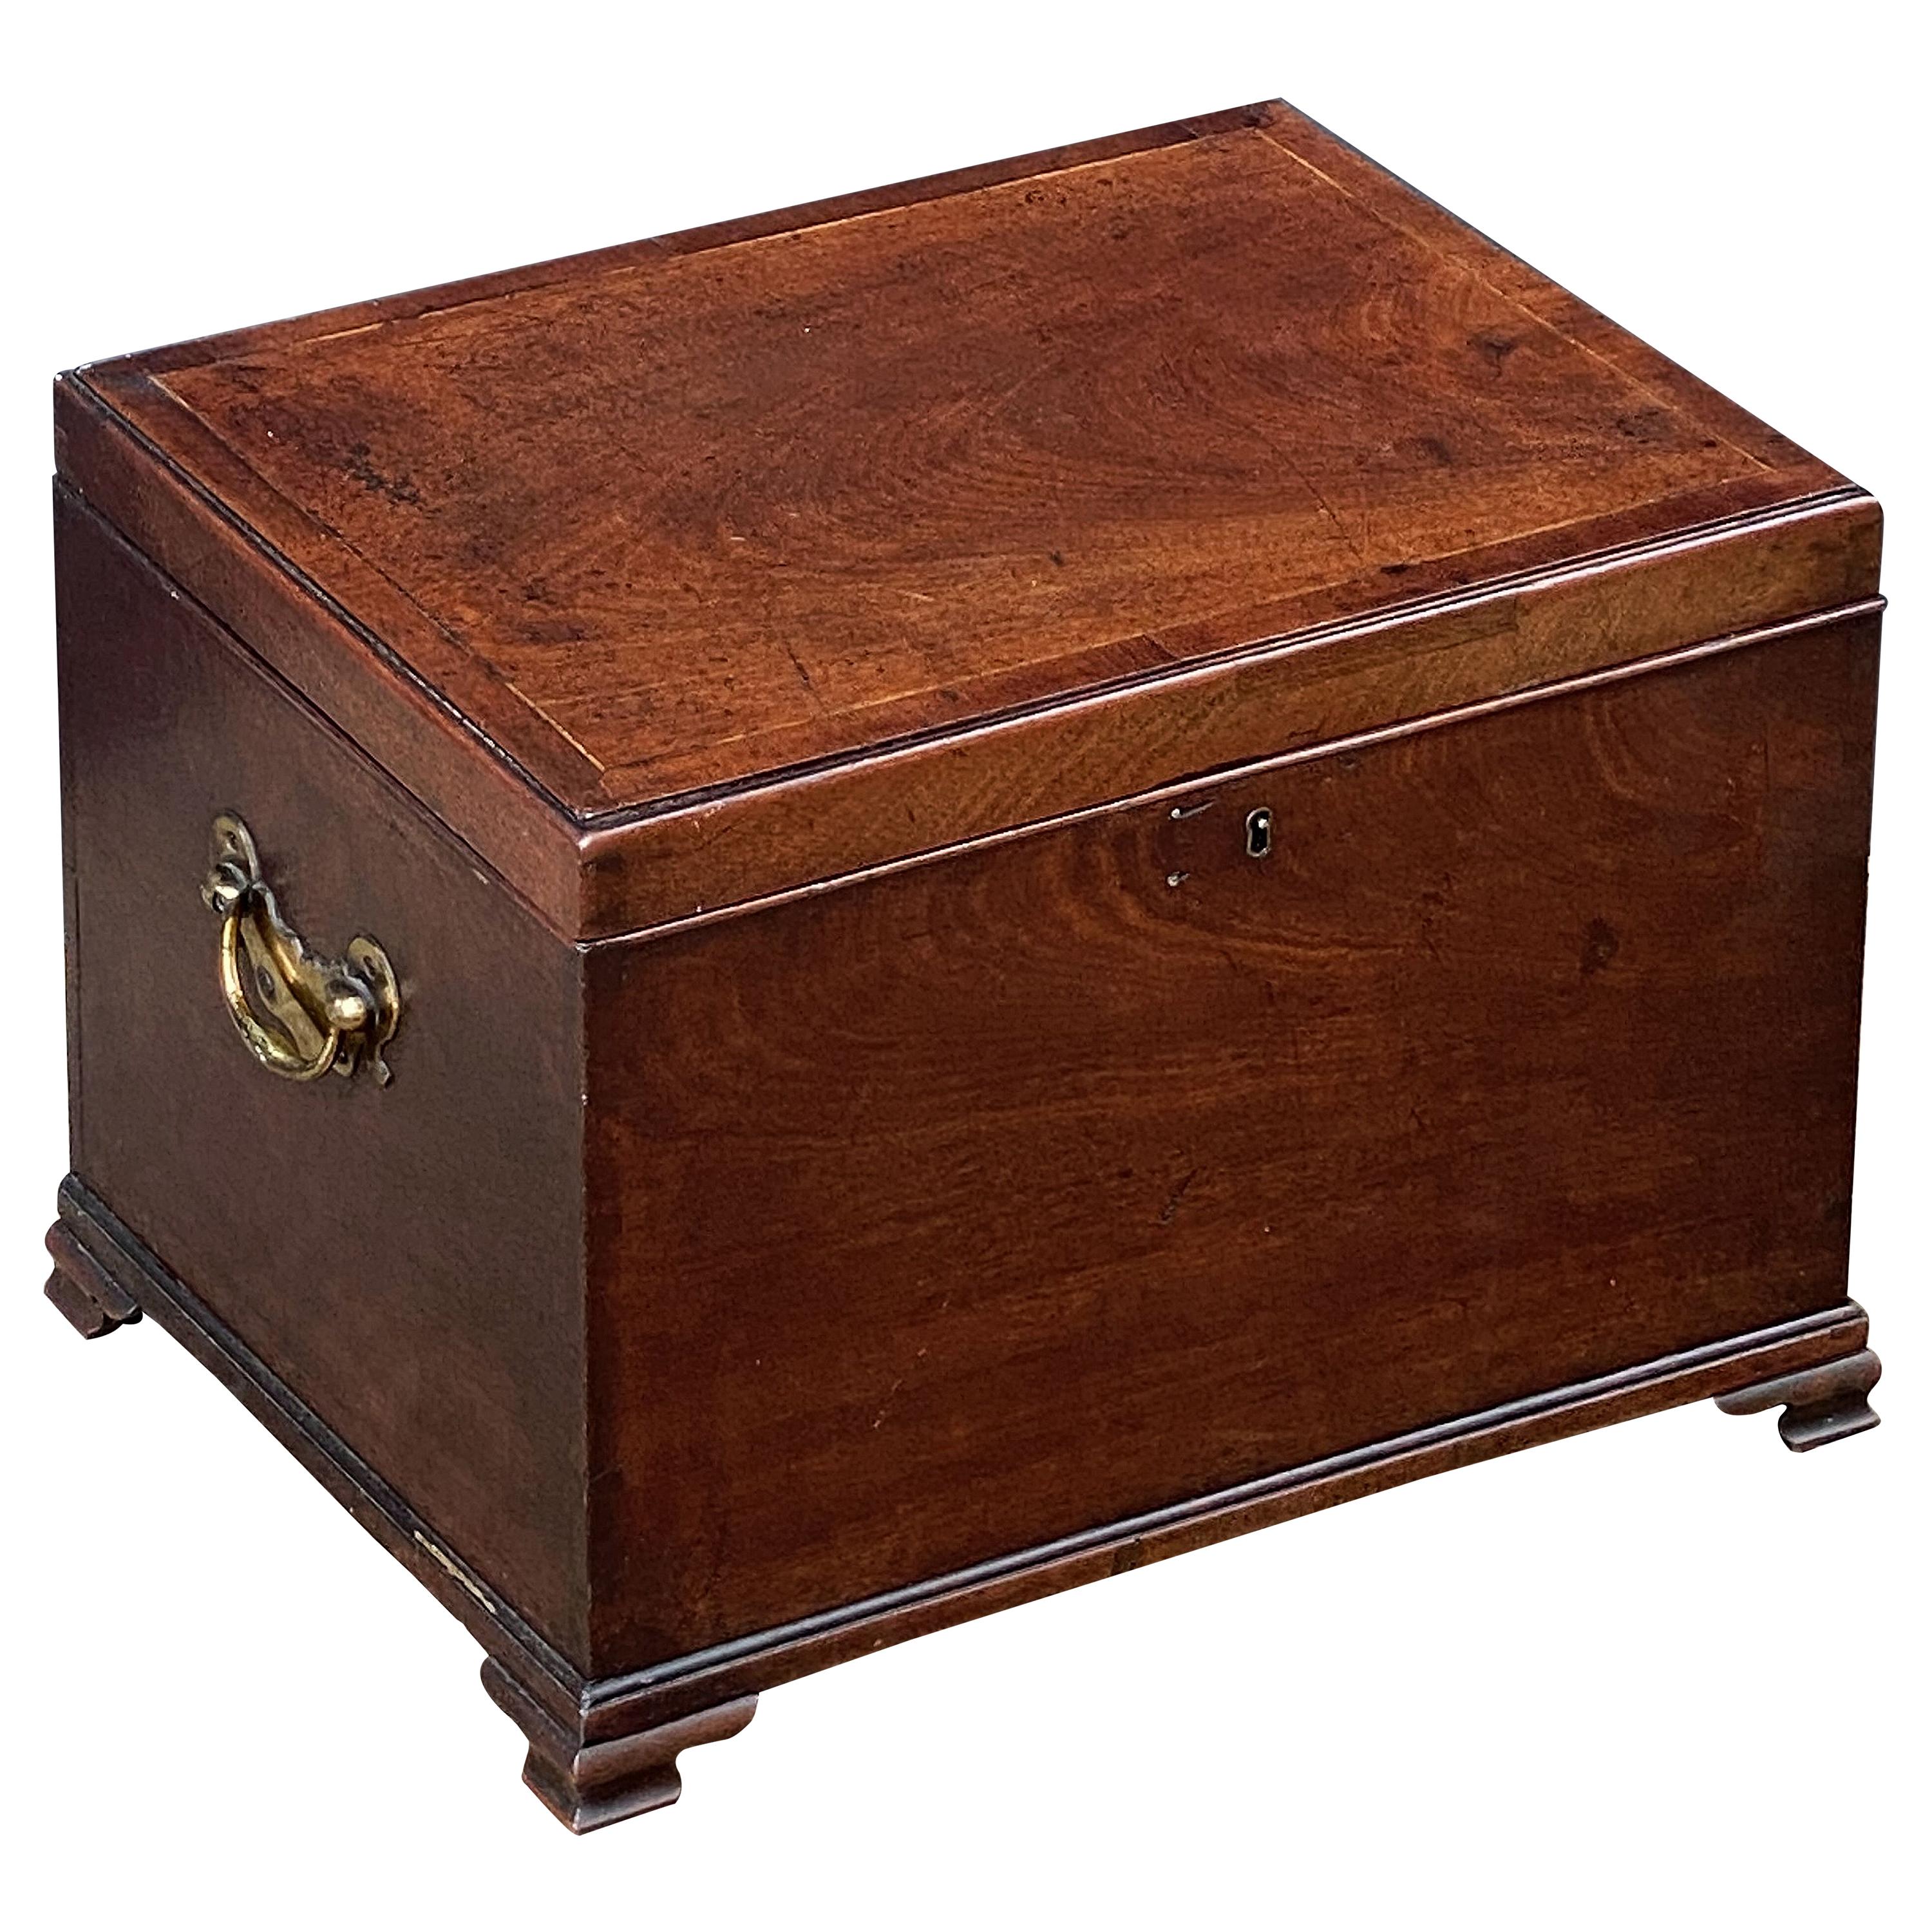 English Small Chest or Box of Mahogany from the George III Era